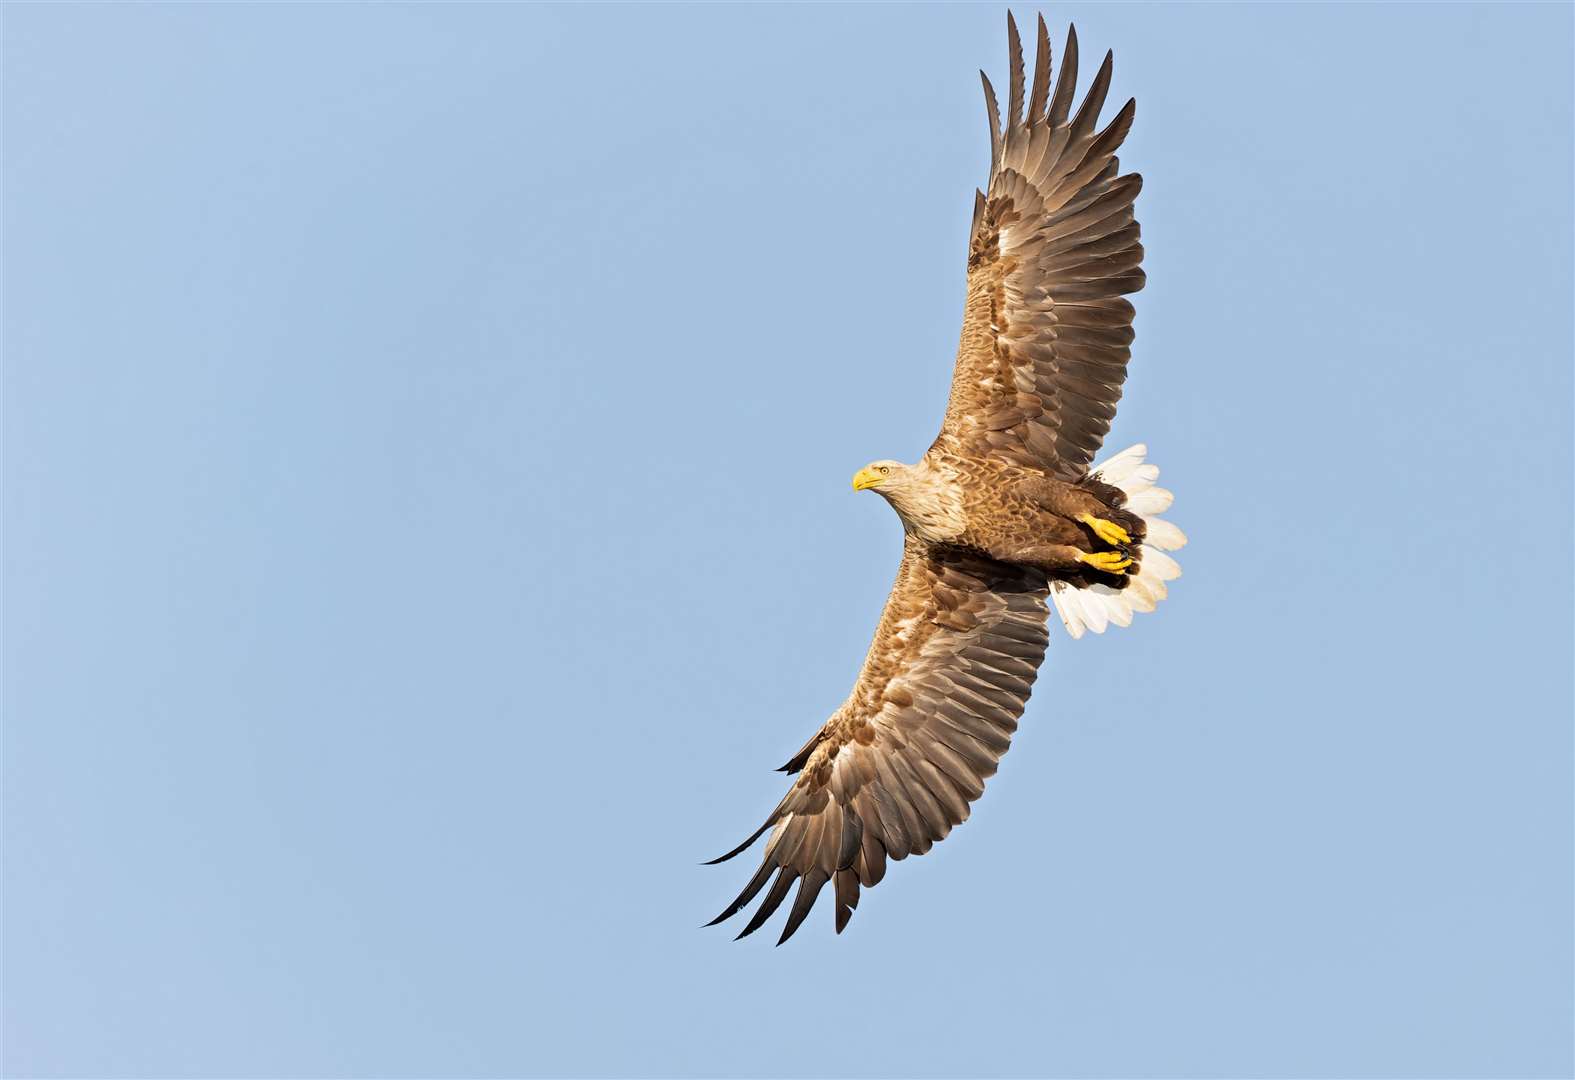 White-tailed eagles have targeted lambs.